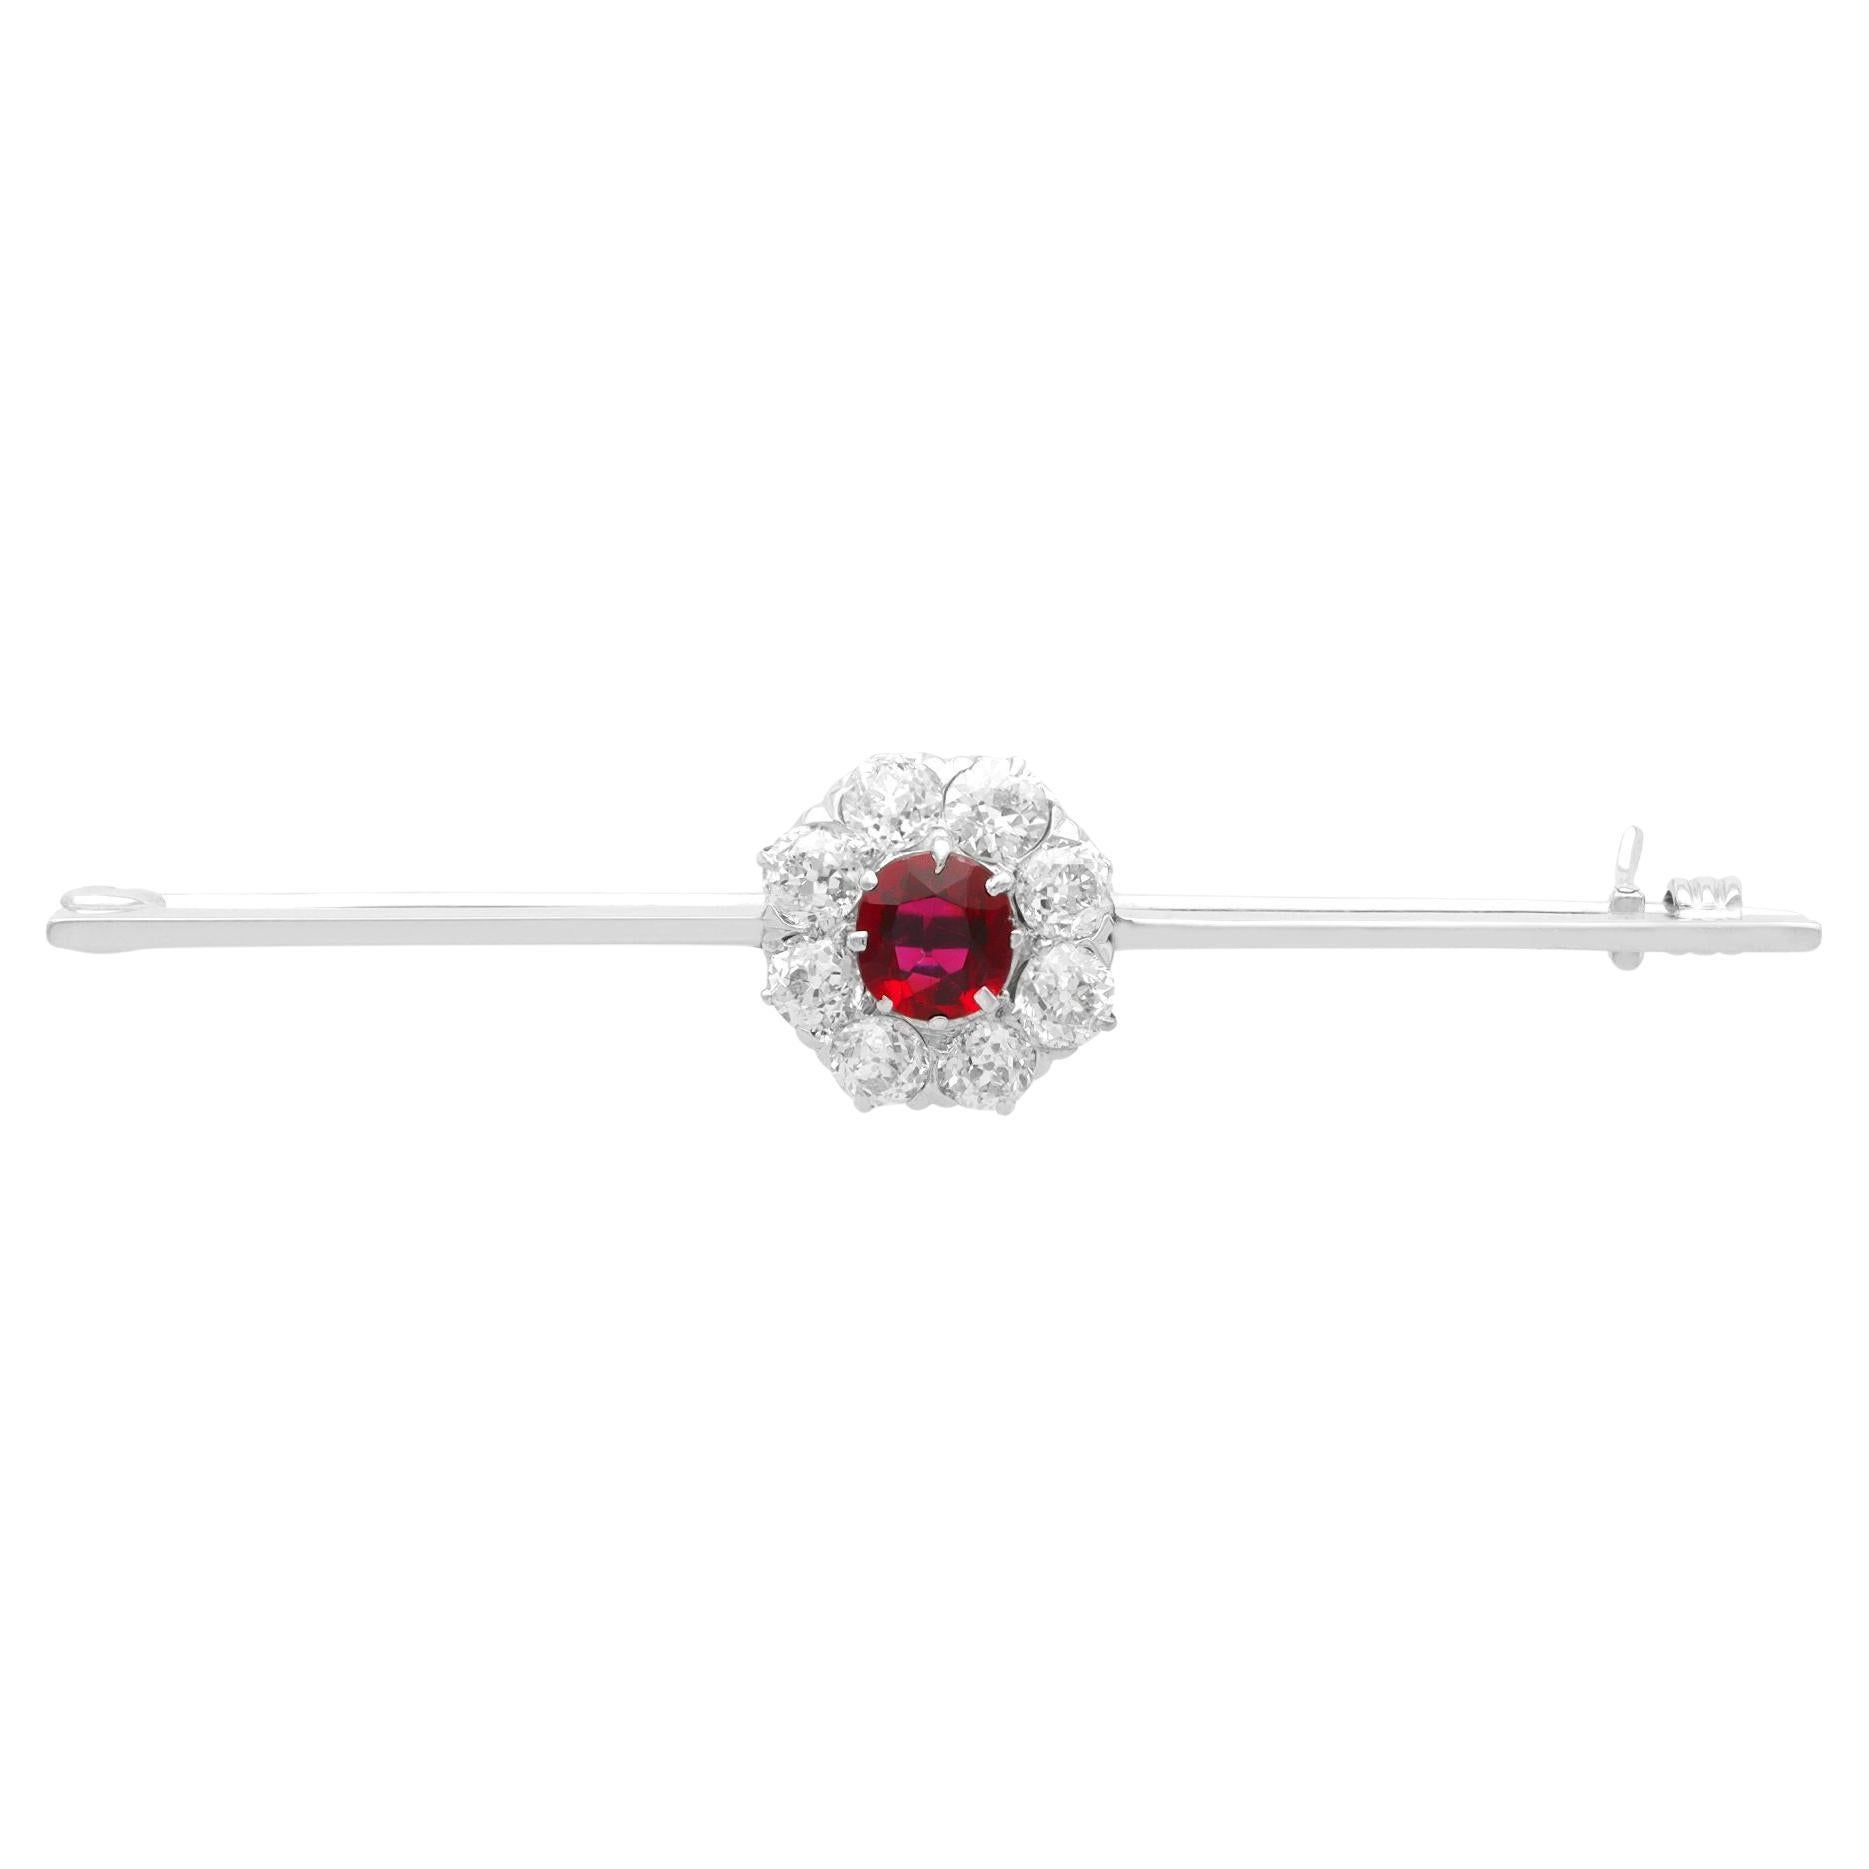 Antique Ruby and 1.32 Carat Diamond White Gold Bar Brooch, circa 1920 For Sale